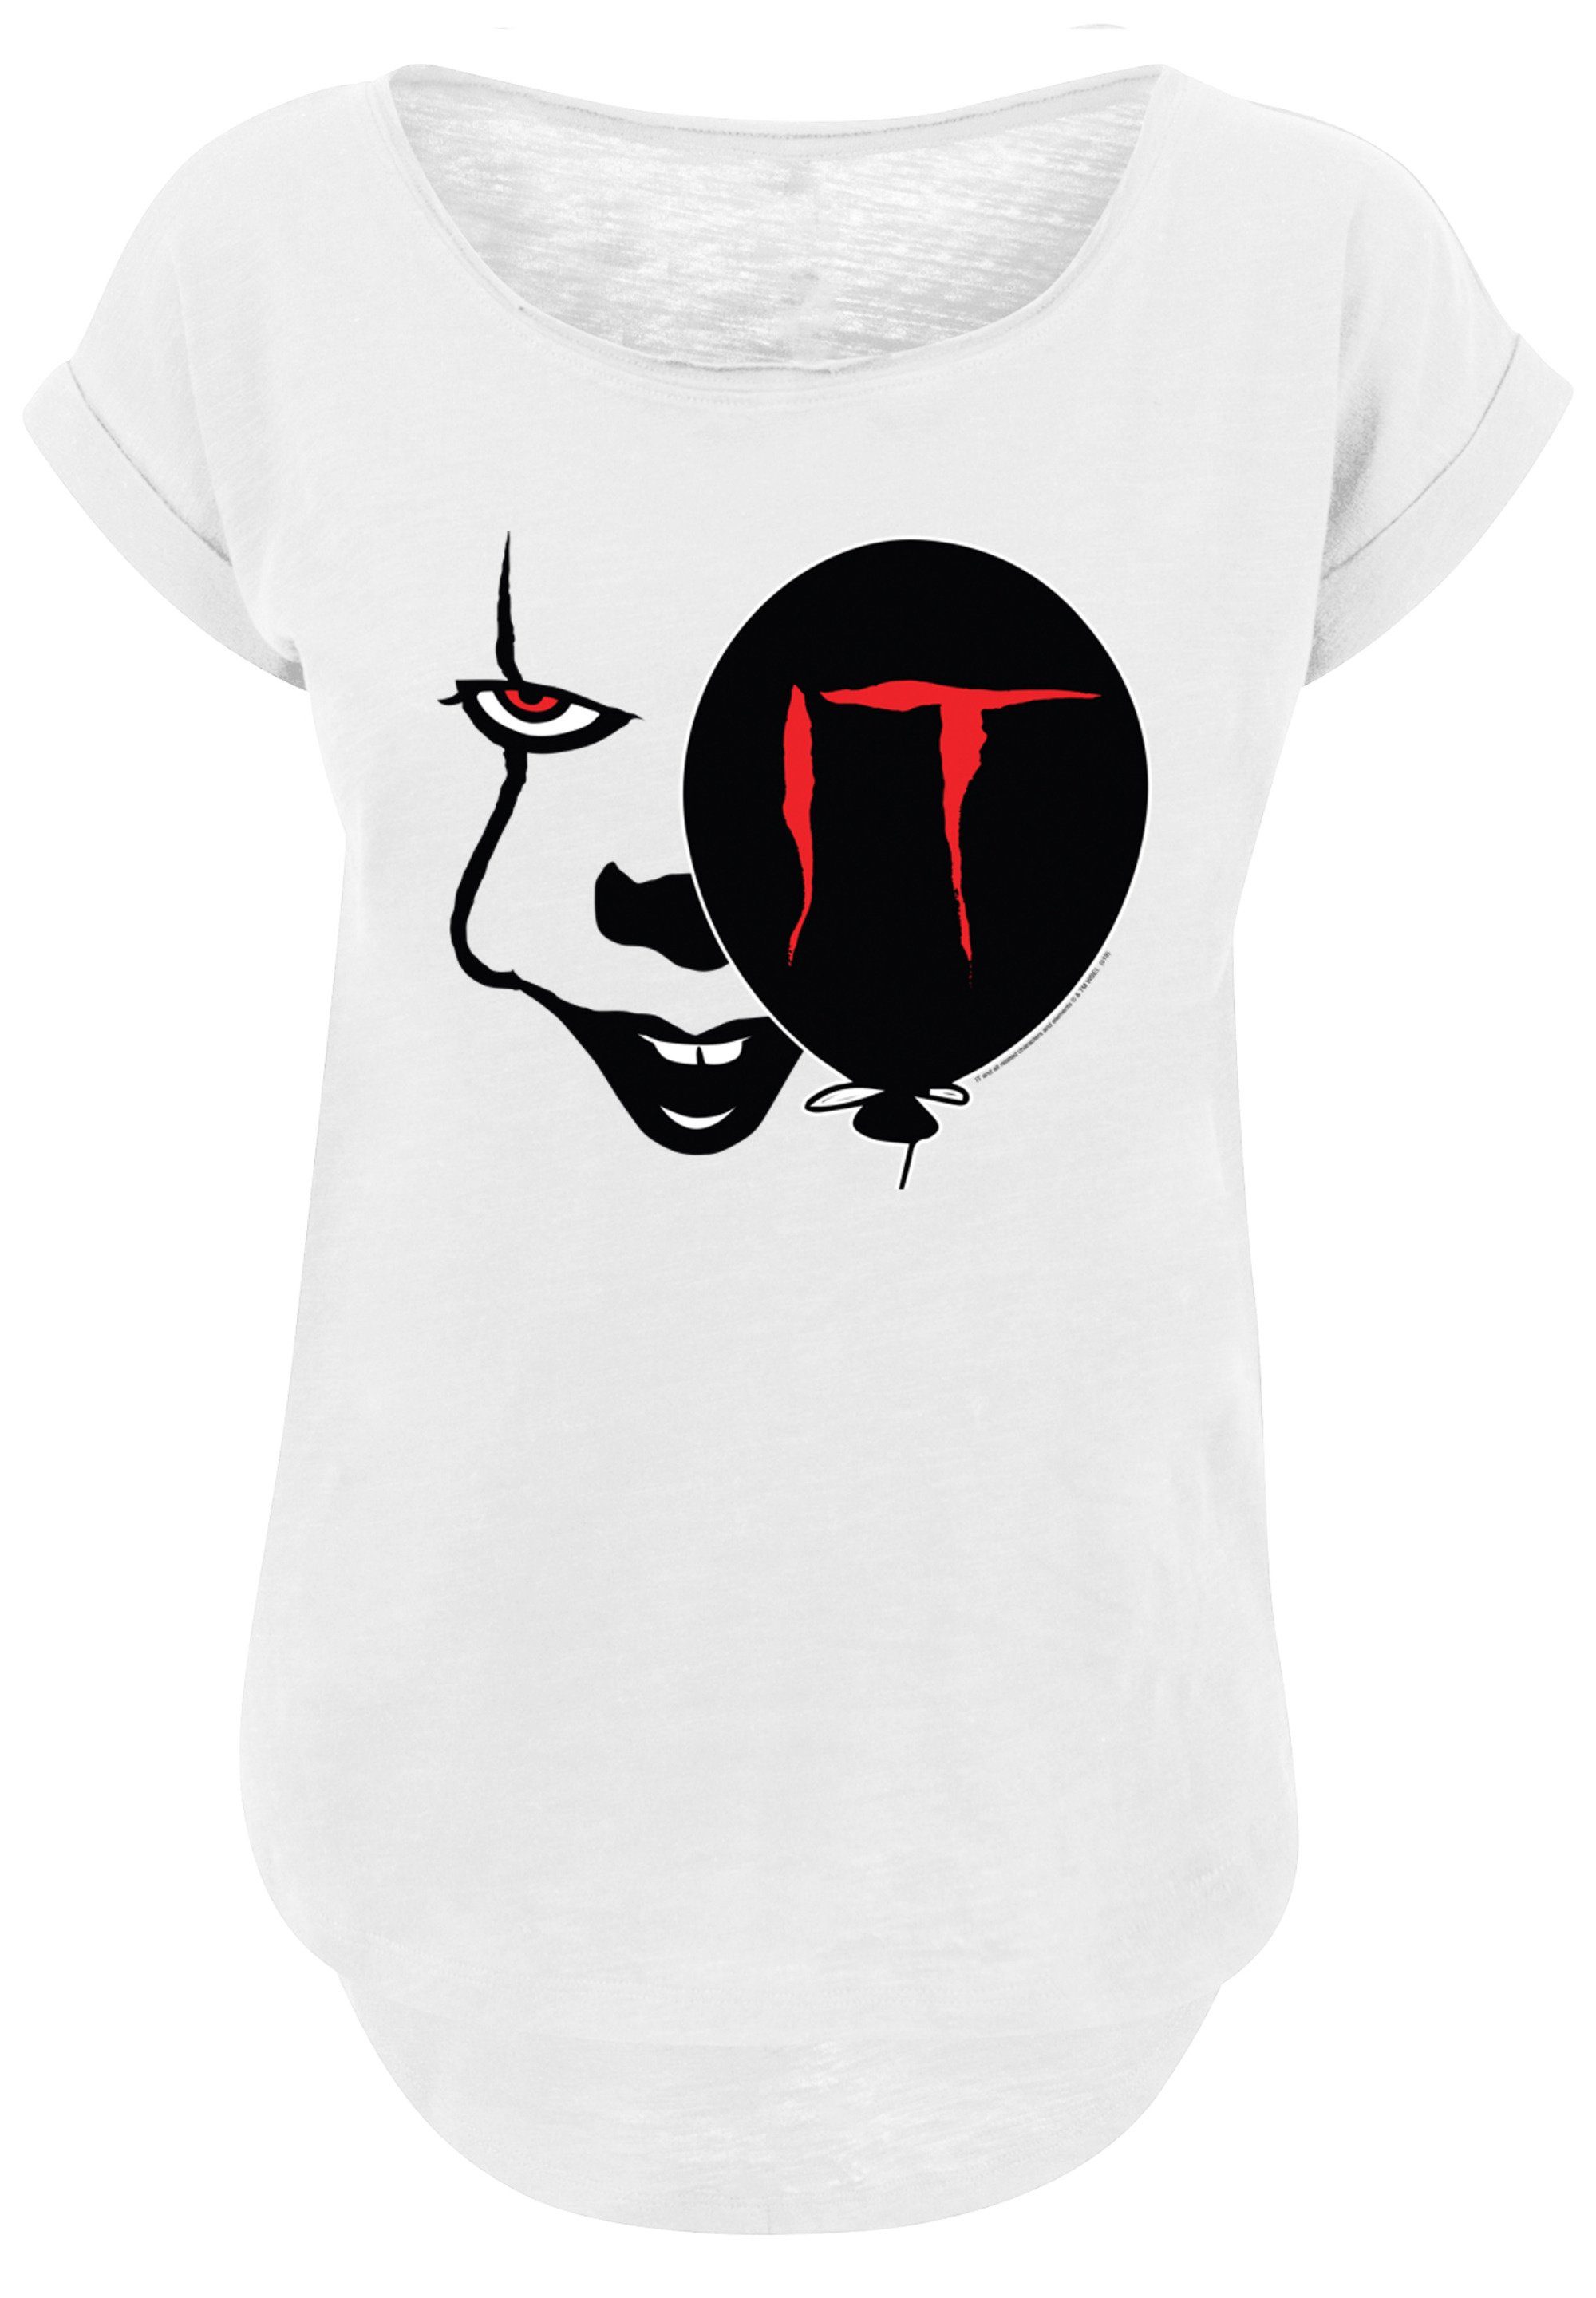 F4NT4STIC T-Shirt IT Film ES Print King Pennywise Stephen